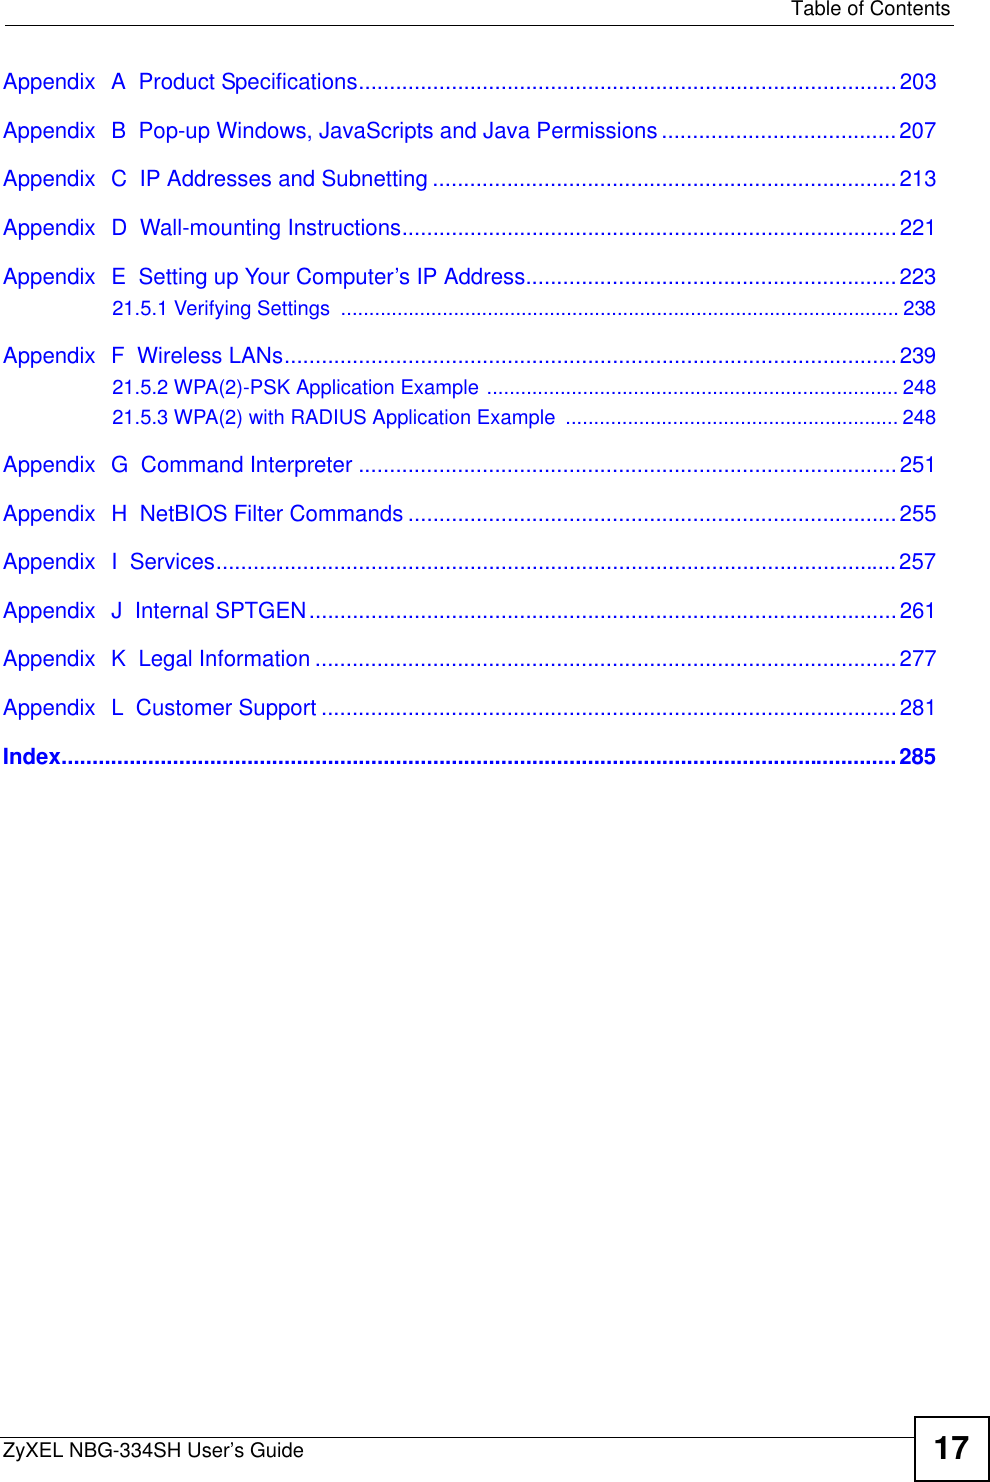   Table of ContentsZyXEL NBG-334SH User’s Guide 17Appendix  A  Product Specifications.......................................................................................203Appendix  B  Pop-up Windows, JavaScripts and Java Permissions ......................................207Appendix  C  IP Addresses and Subnetting ...........................................................................213Appendix  D  Wall-mounting Instructions................................................................................221Appendix  E  Setting up Your Computer’s IP Address............................................................22321.5.1 Verifying Settings  ................................................................................................... 238Appendix  F  Wireless LANs...................................................................................................23921.5.2 WPA(2)-PSK Application Example ......................................................................... 24821.5.3 WPA(2) with RADIUS Application Example  ........................................................... 248Appendix  G  Command Interpreter .......................................................................................251Appendix  H  NetBIOS Filter Commands ...............................................................................255Appendix  I  Services..............................................................................................................257Appendix  J  Internal SPTGEN...............................................................................................261Appendix  K  Legal Information ..............................................................................................277Appendix  L  Customer Support .............................................................................................281Index.......................................................................................................................................285